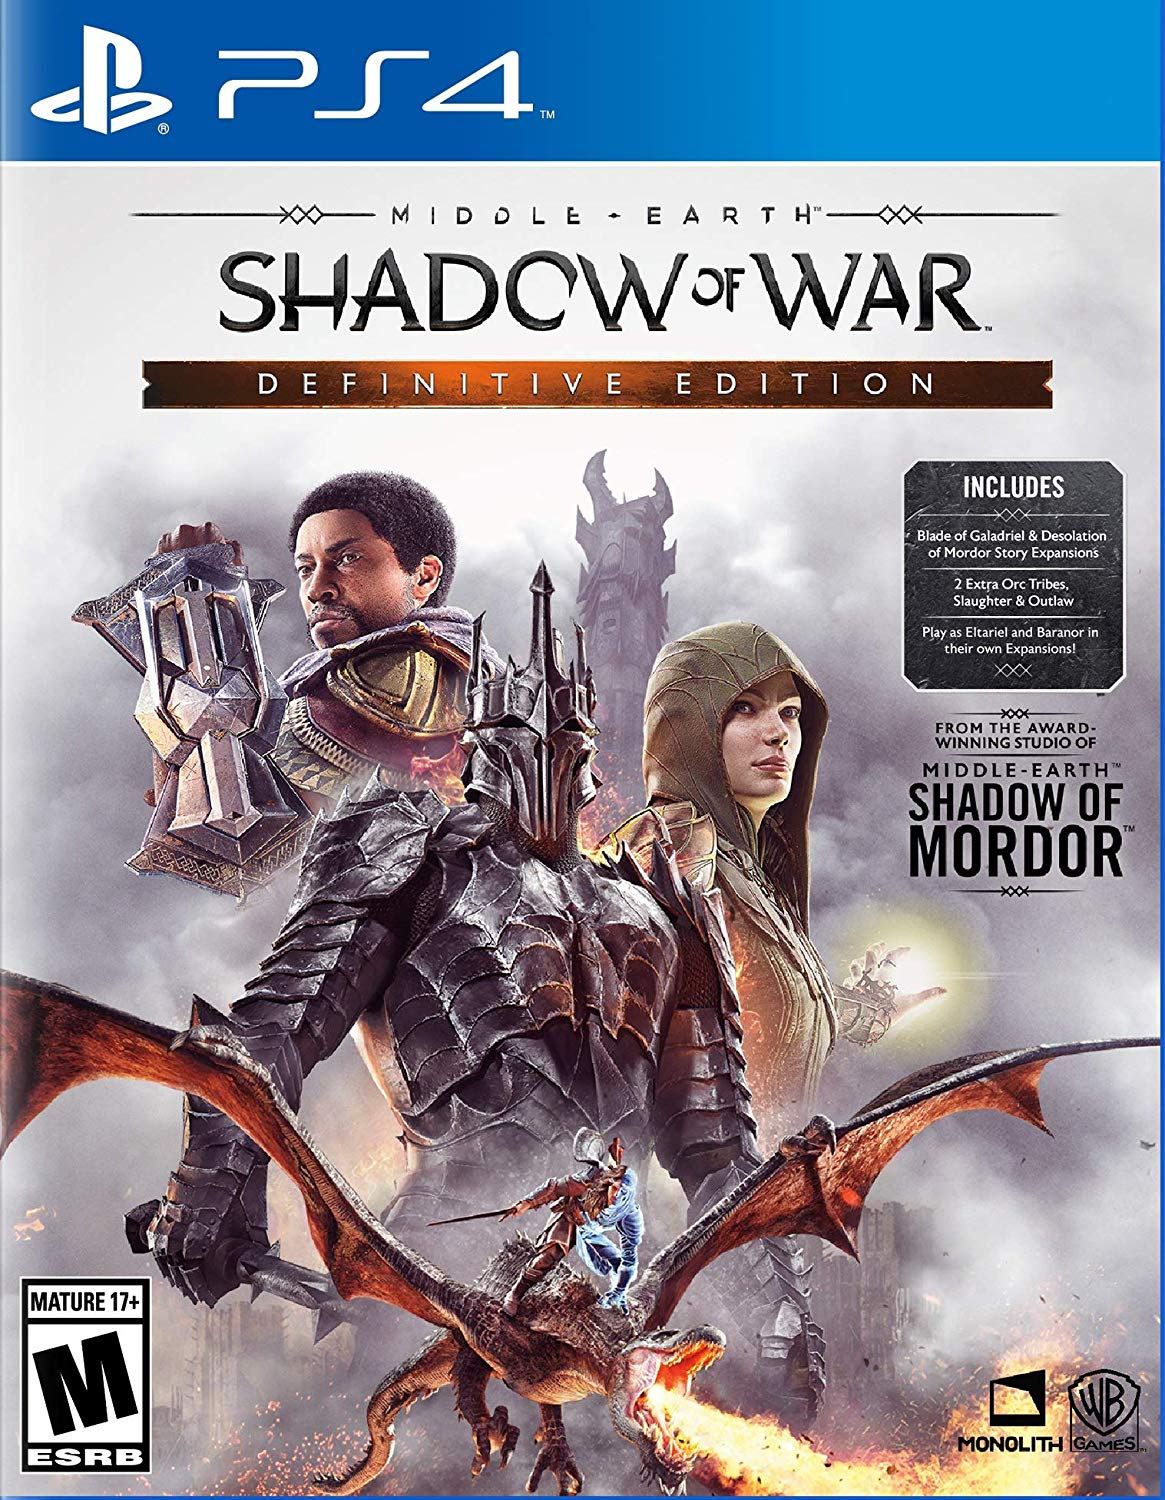 Middle Earth: Shadow of Mordor Release Date Confirmed, New Story